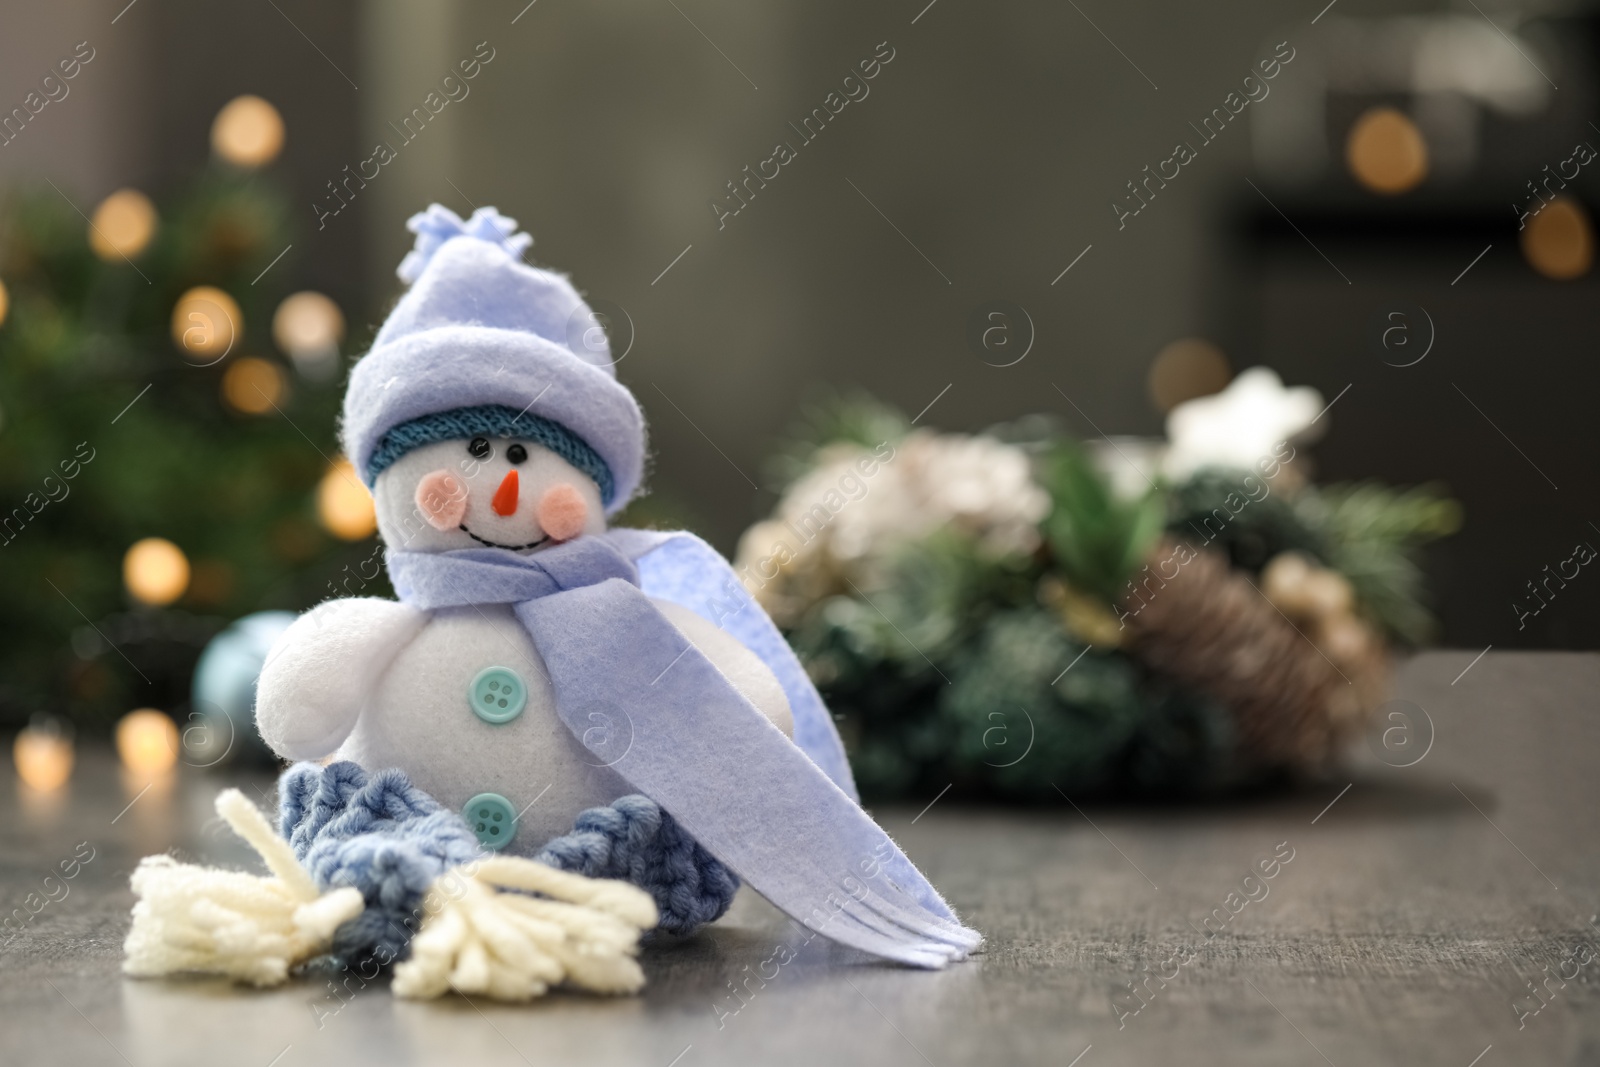 Photo of Snowman toy on grey table against blurred festive lights, space for text. Christmas decoration